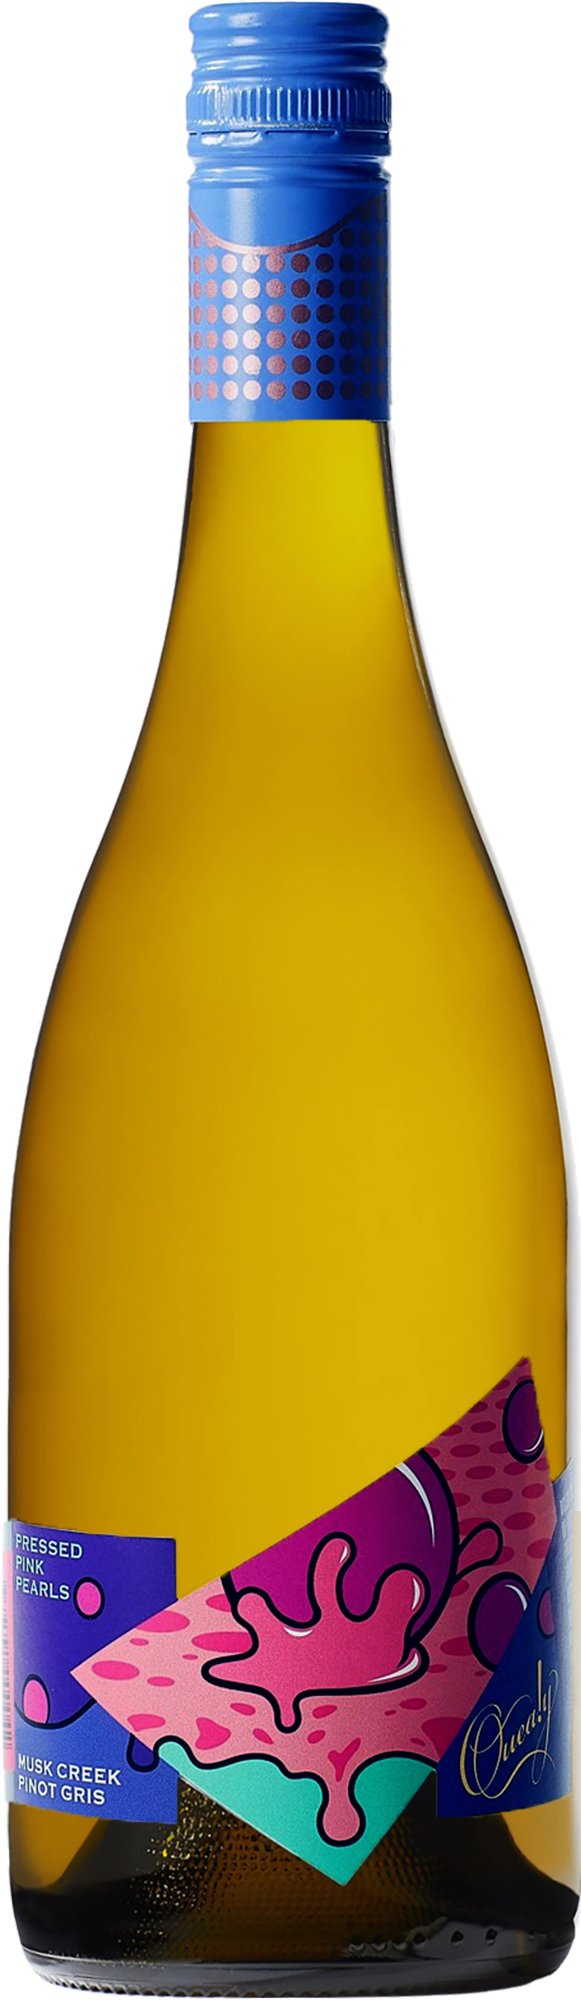 Quealy Musk Creek Pinot Gris 2022